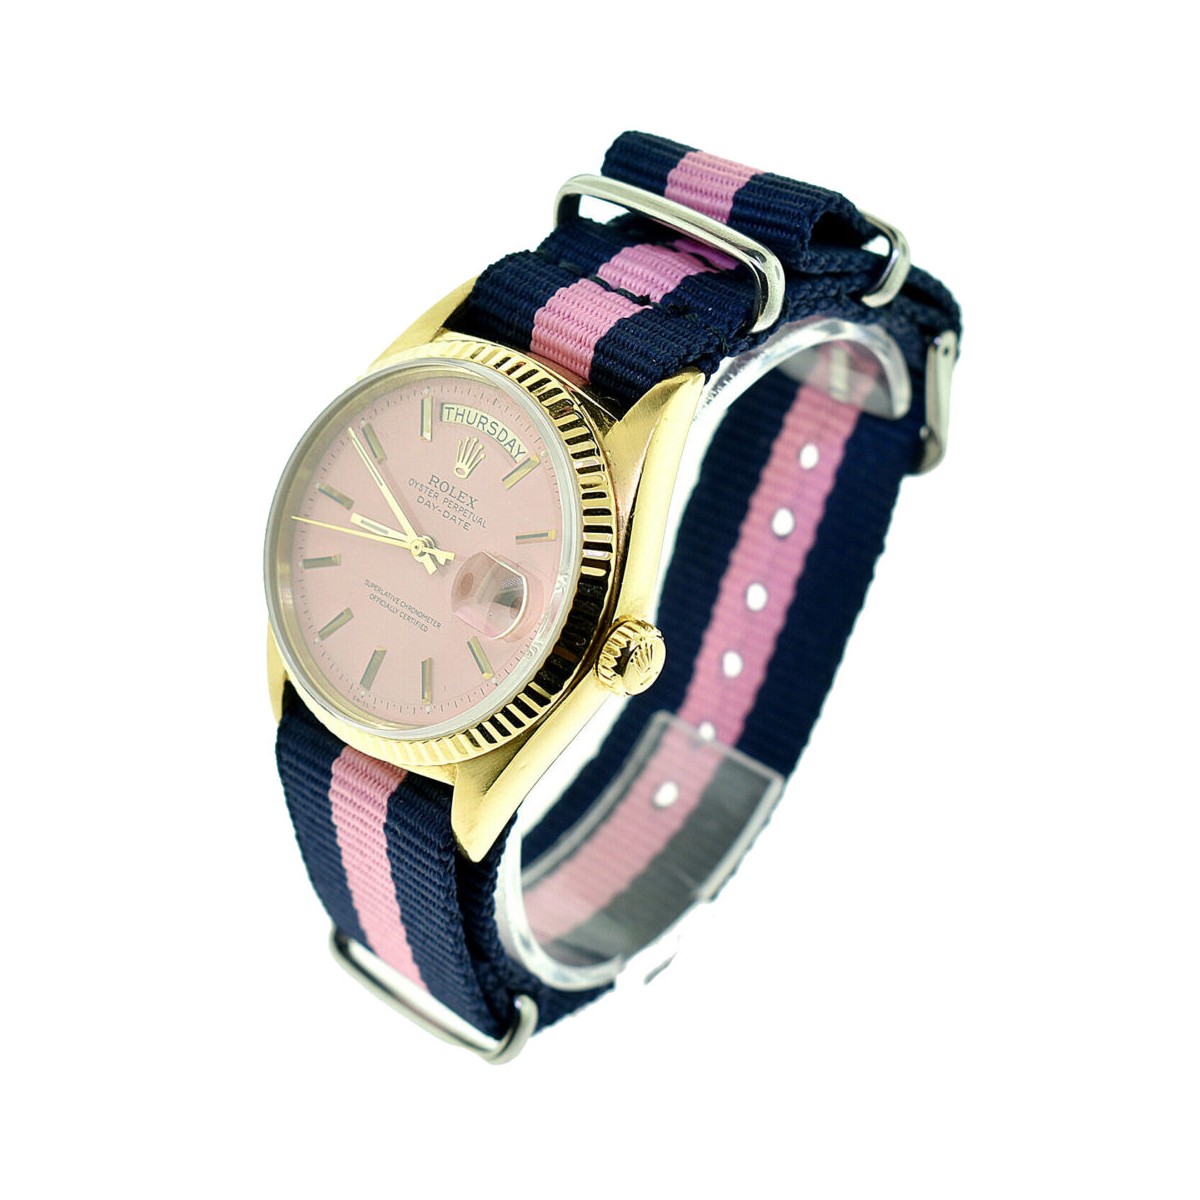 Rolex Day Date Pink Dial